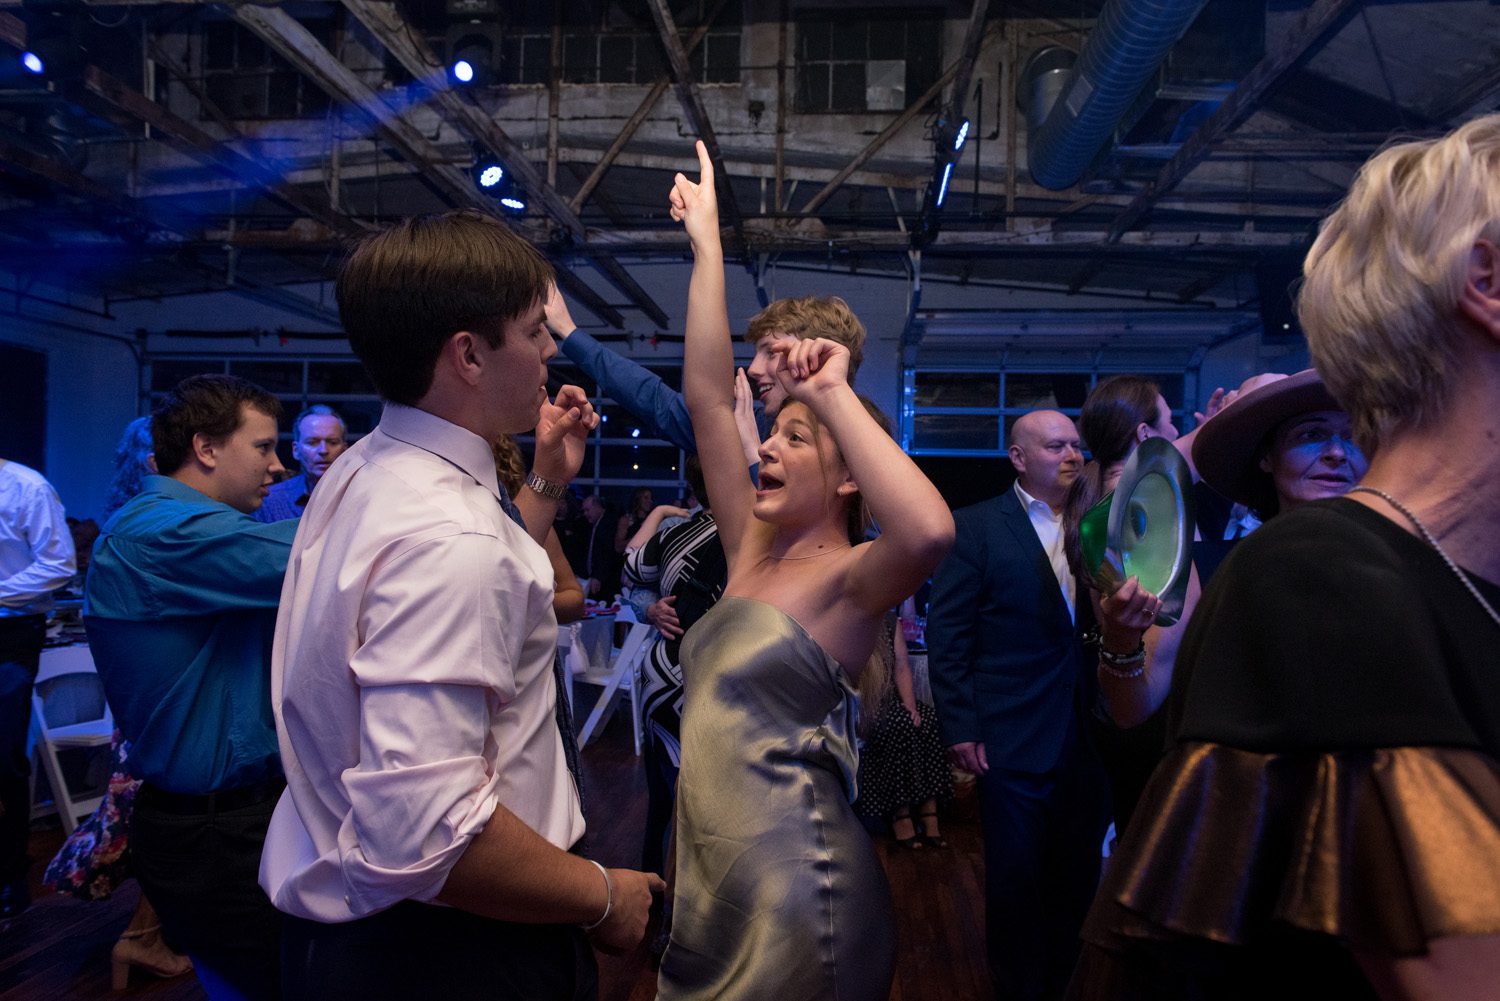 Two young adults dancing on the dance floor at a connecticut bat mitzvah